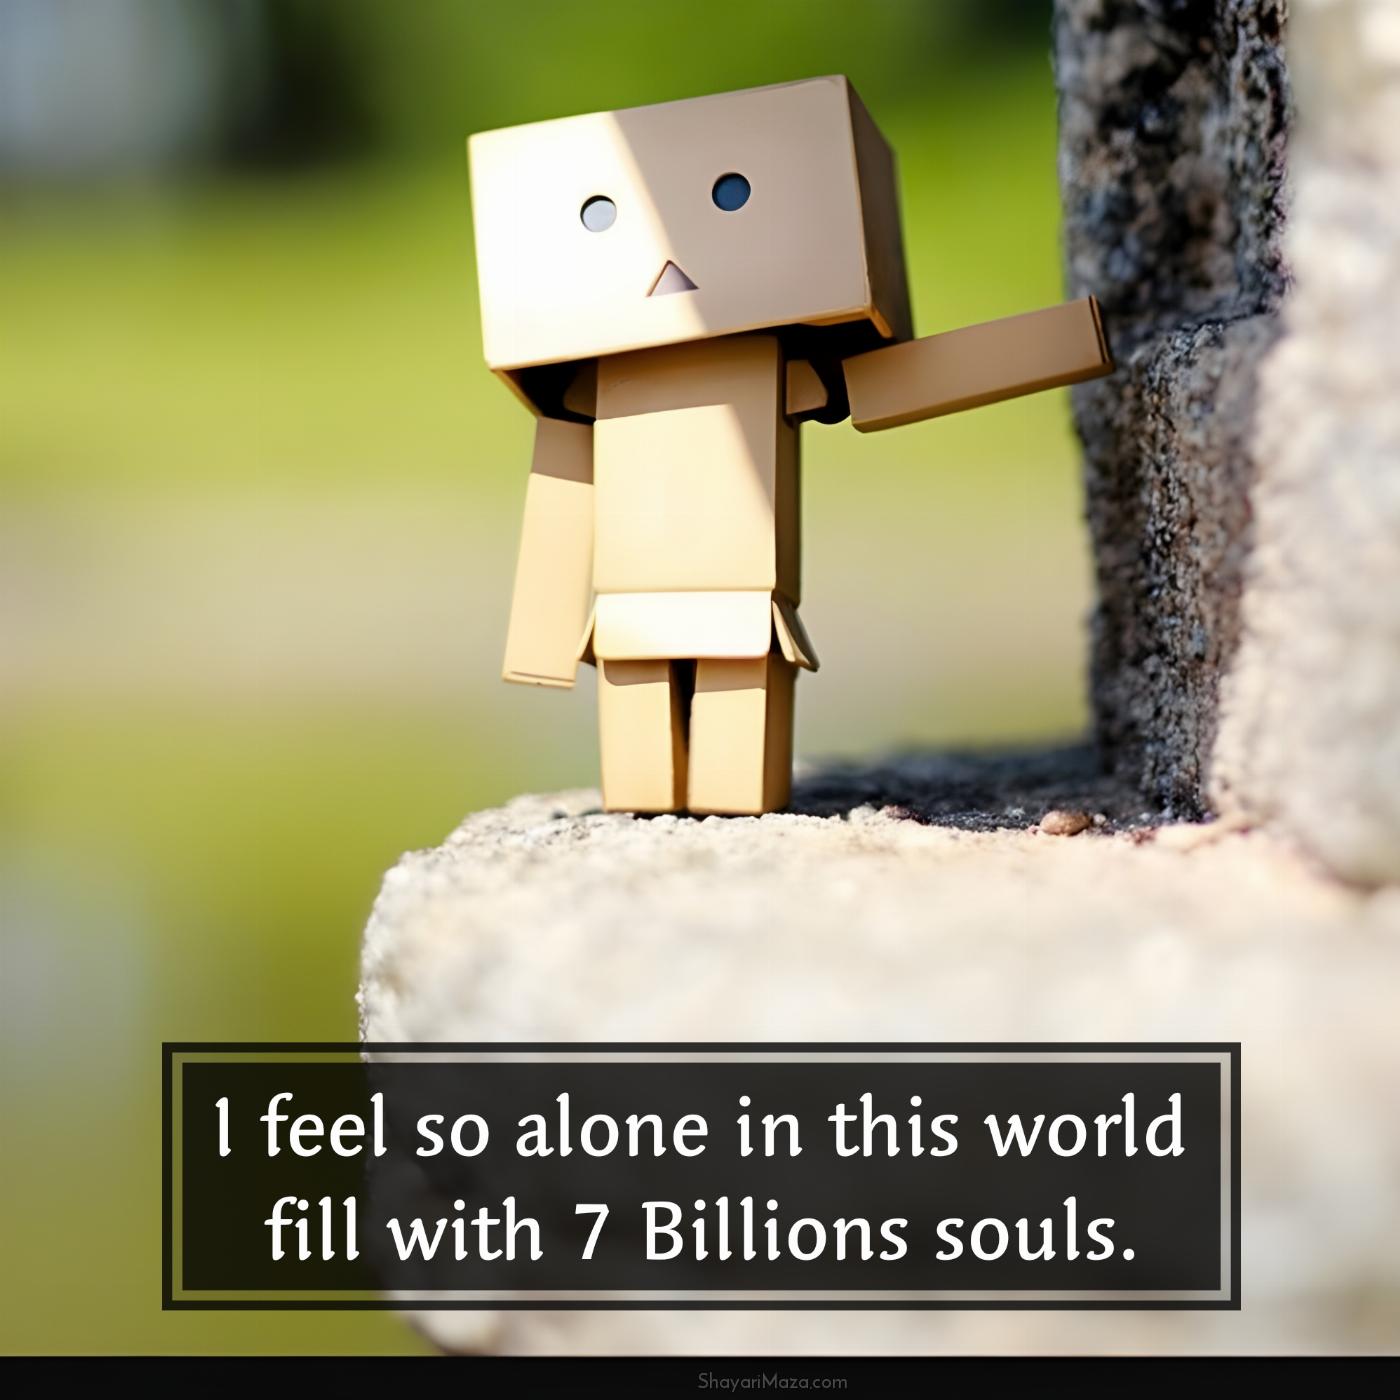 I feel so alone in this world fill with 7 Billions souls